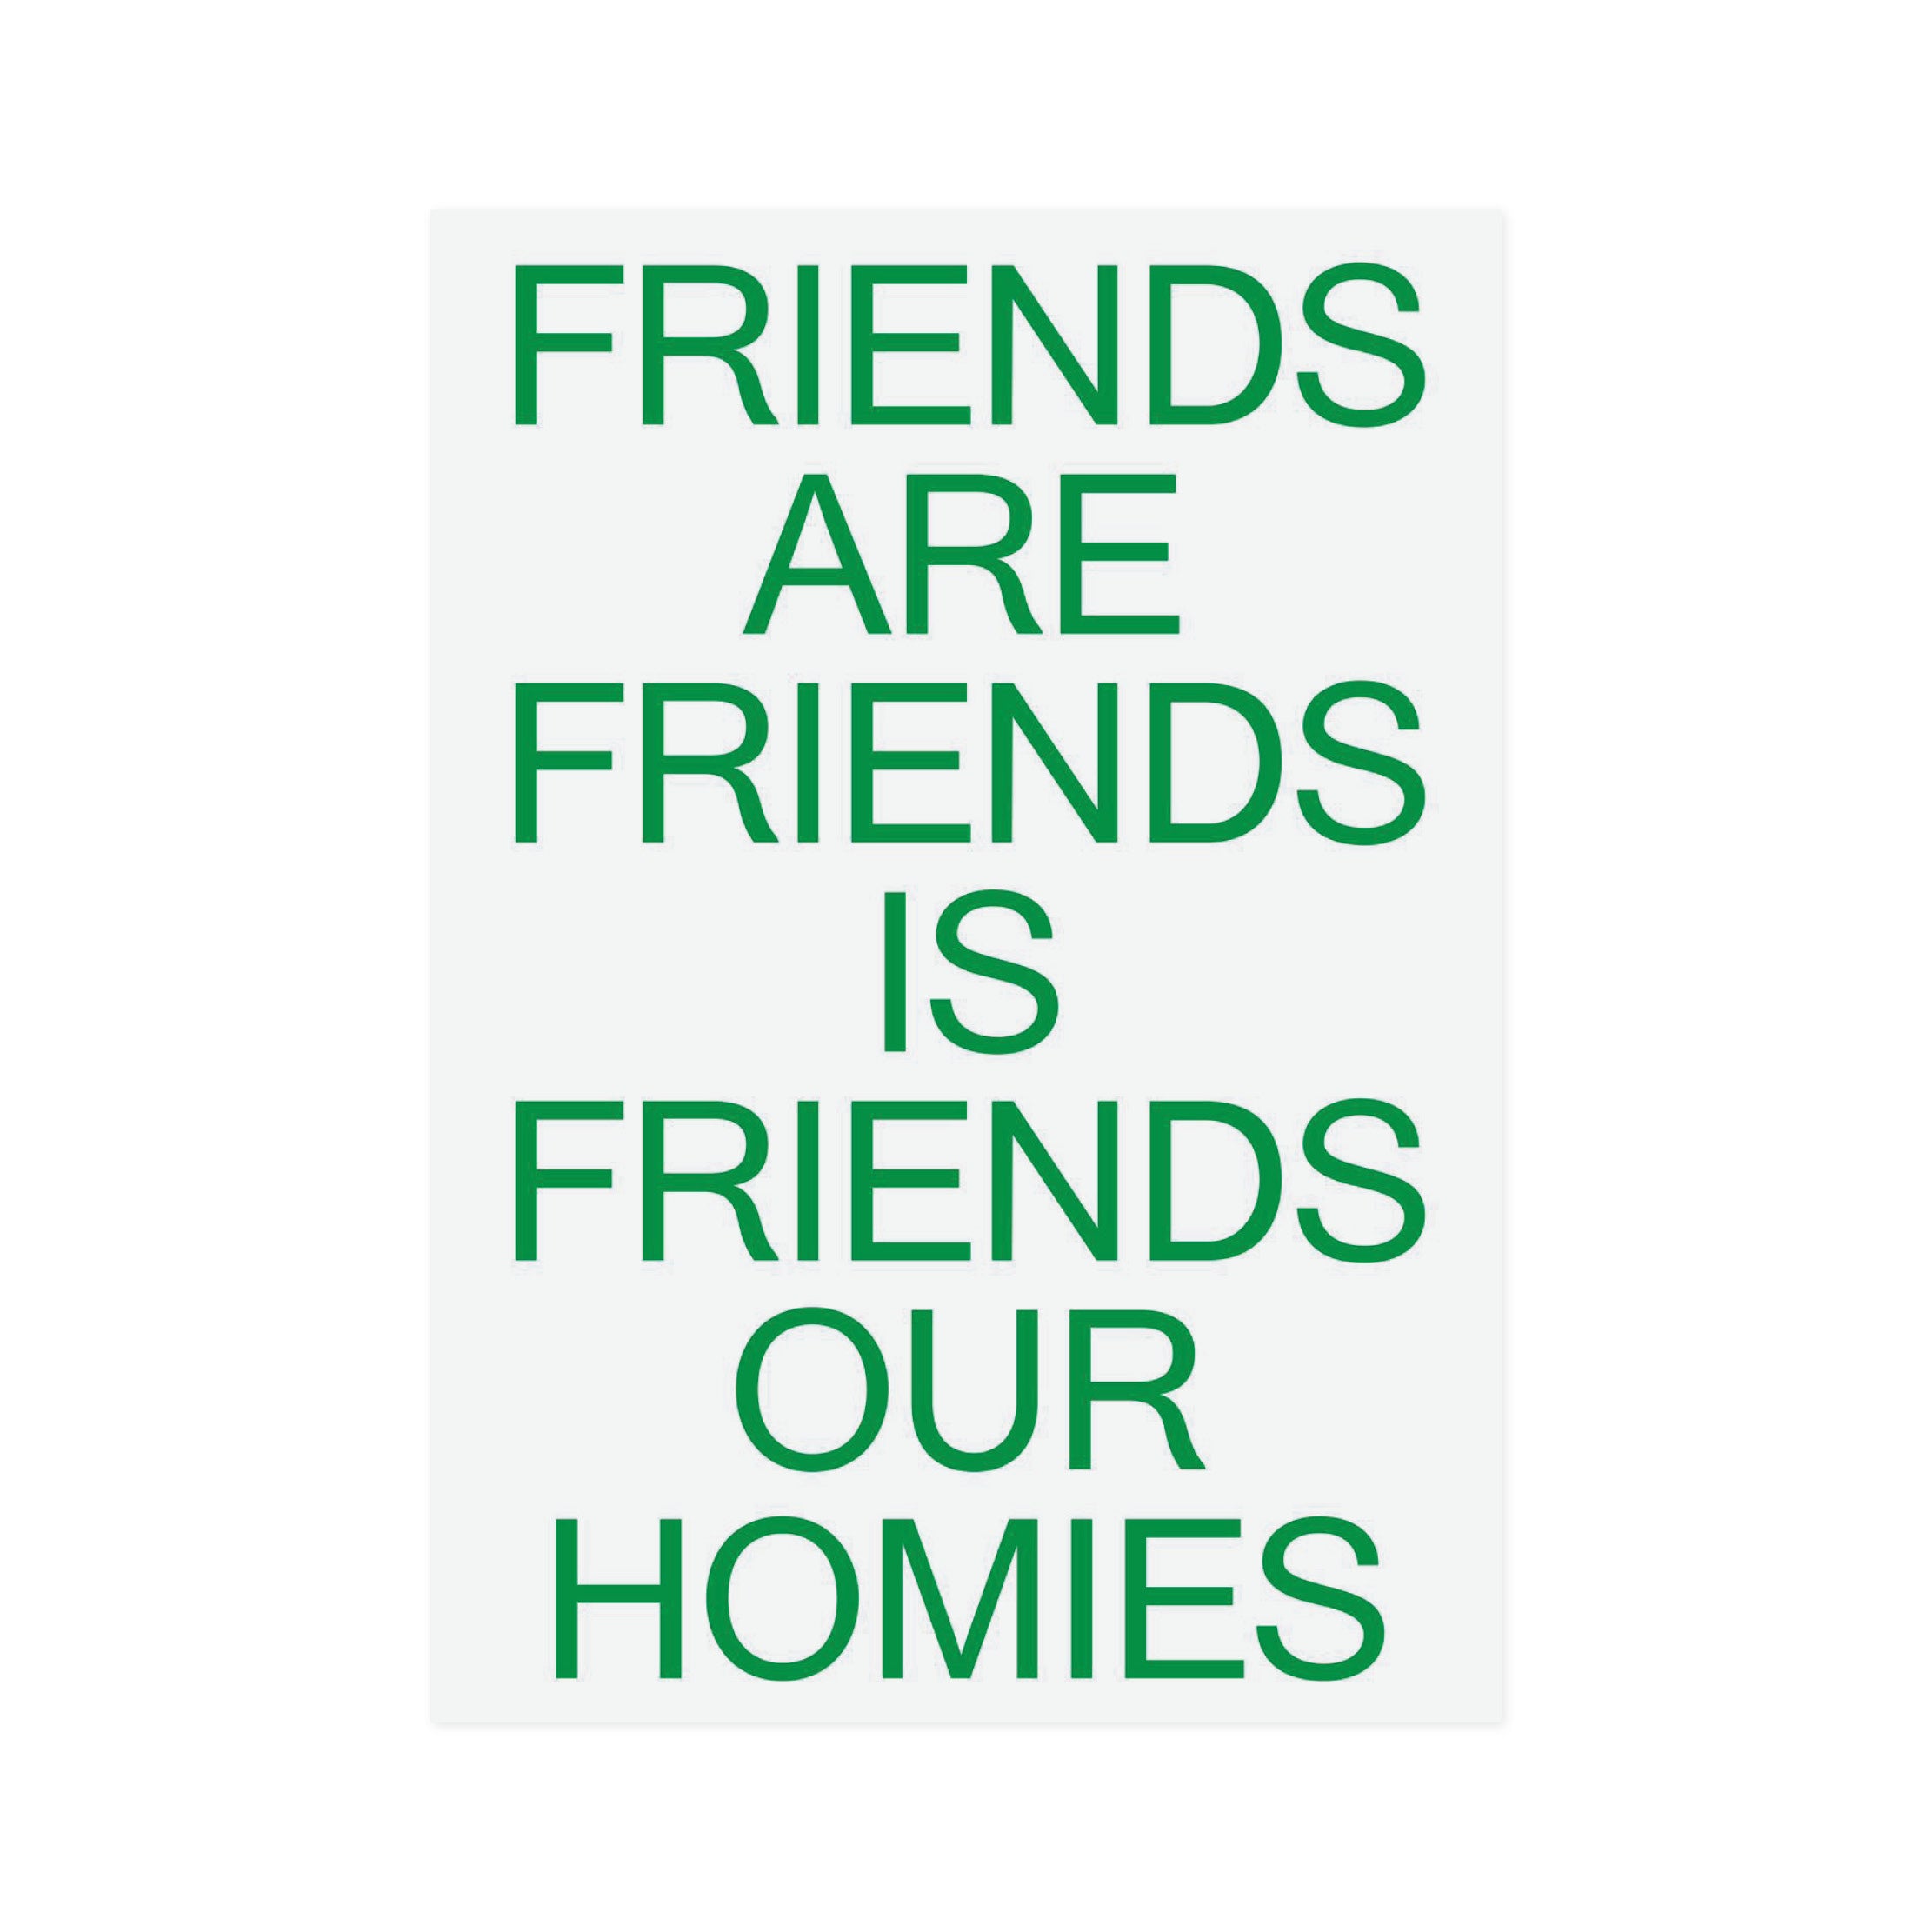 Catalogue Library - Catalogue Design - Friends Our Family A2 Print - Green